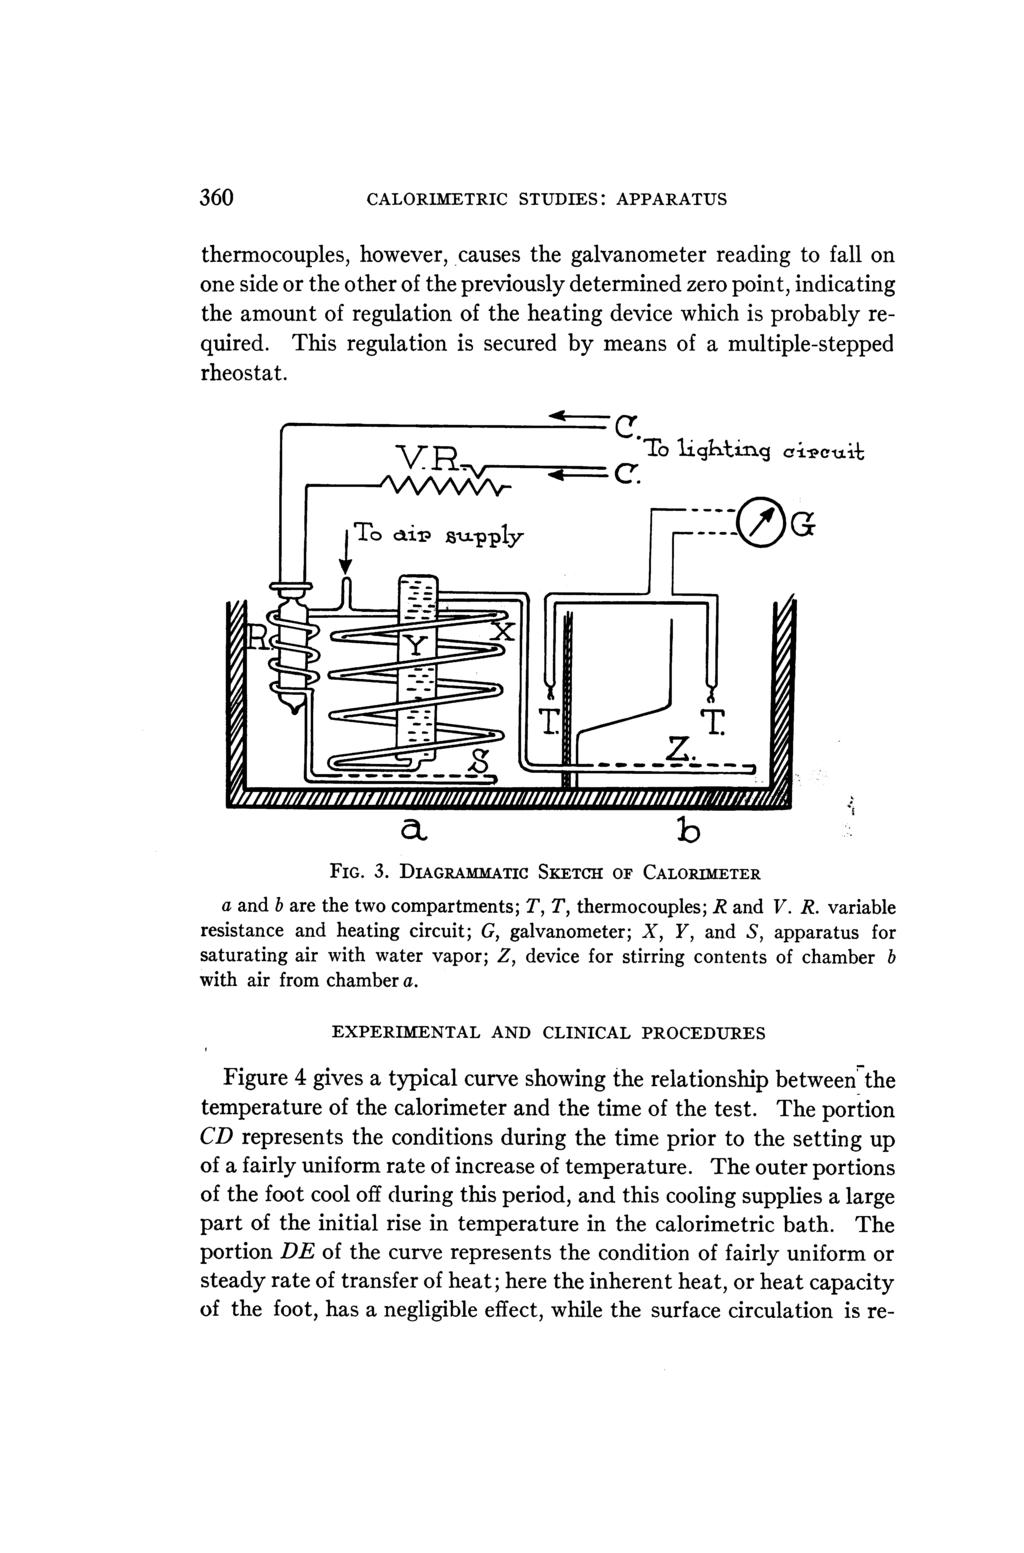 360 CALORIMETRIC STUDIES: APPARATUS thermocouples, however, causes the galvanometer reading to fall on one side or the other of the previously determined zero point, indicating the amount of